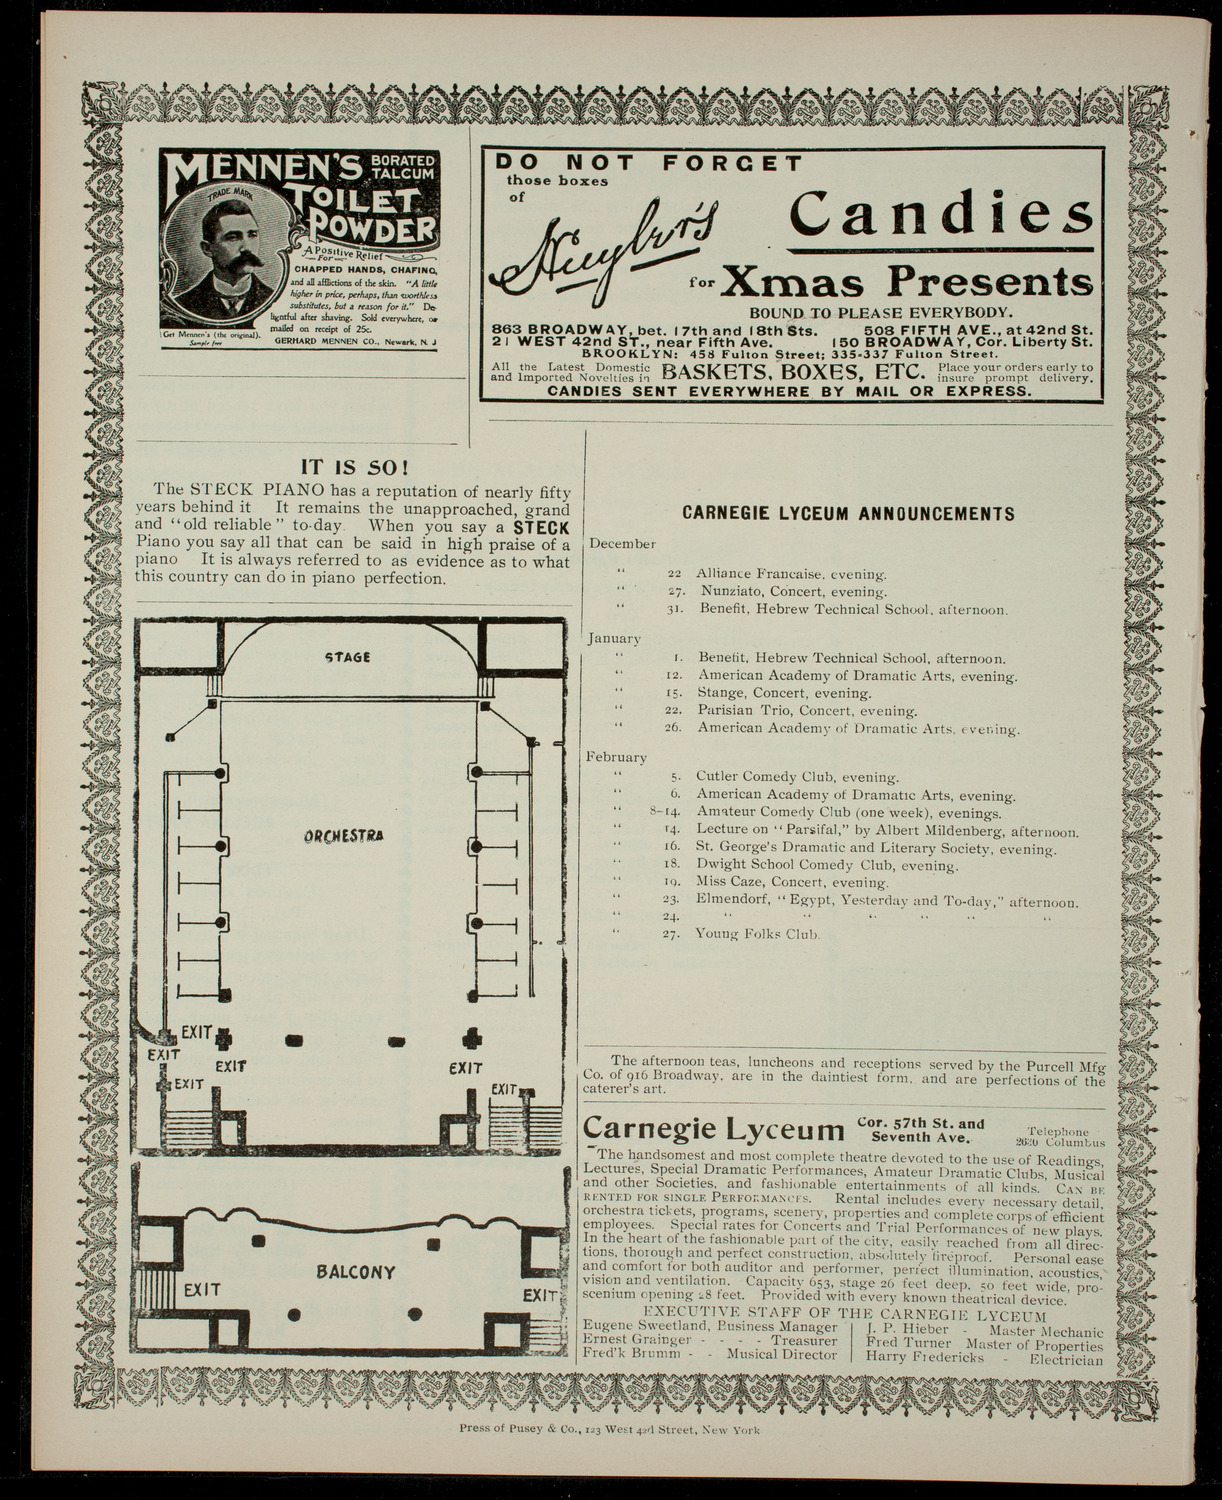 Academy Stock Company of the American Academy of Dramatic Arts/ Empire Theatre Dramatic School, December 21, 1903, program page 4